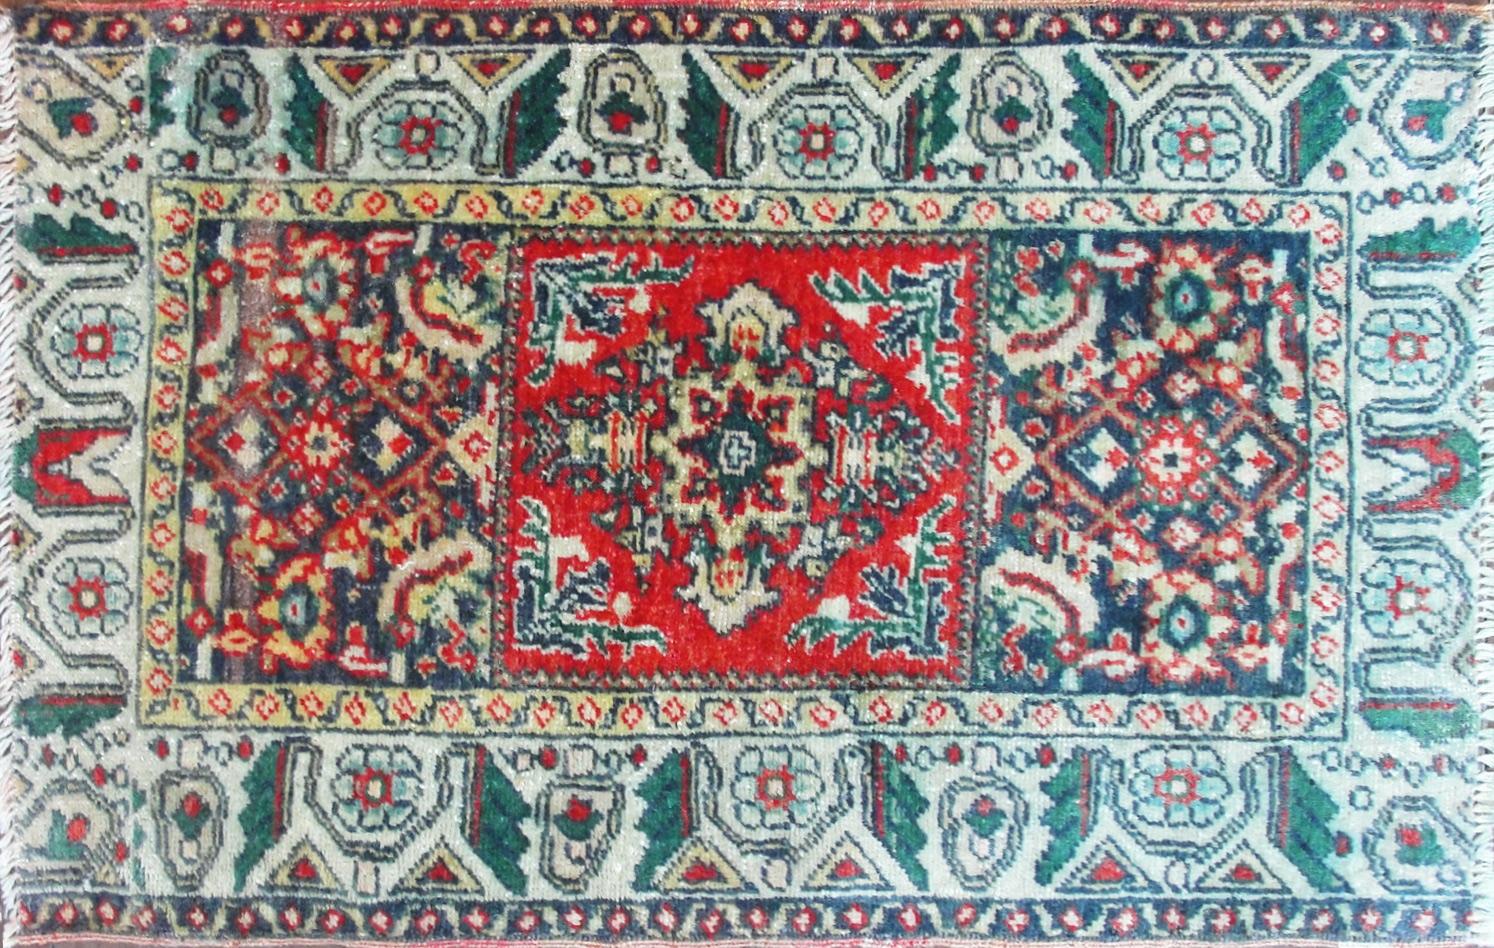 Yastik or pillow or bloster cover, Although it is not perfect, but beautiful distinctive Anatolian motives and soft color, depicts three rugs design surrounded by geometric shape . As more we continue with the description as more it got more